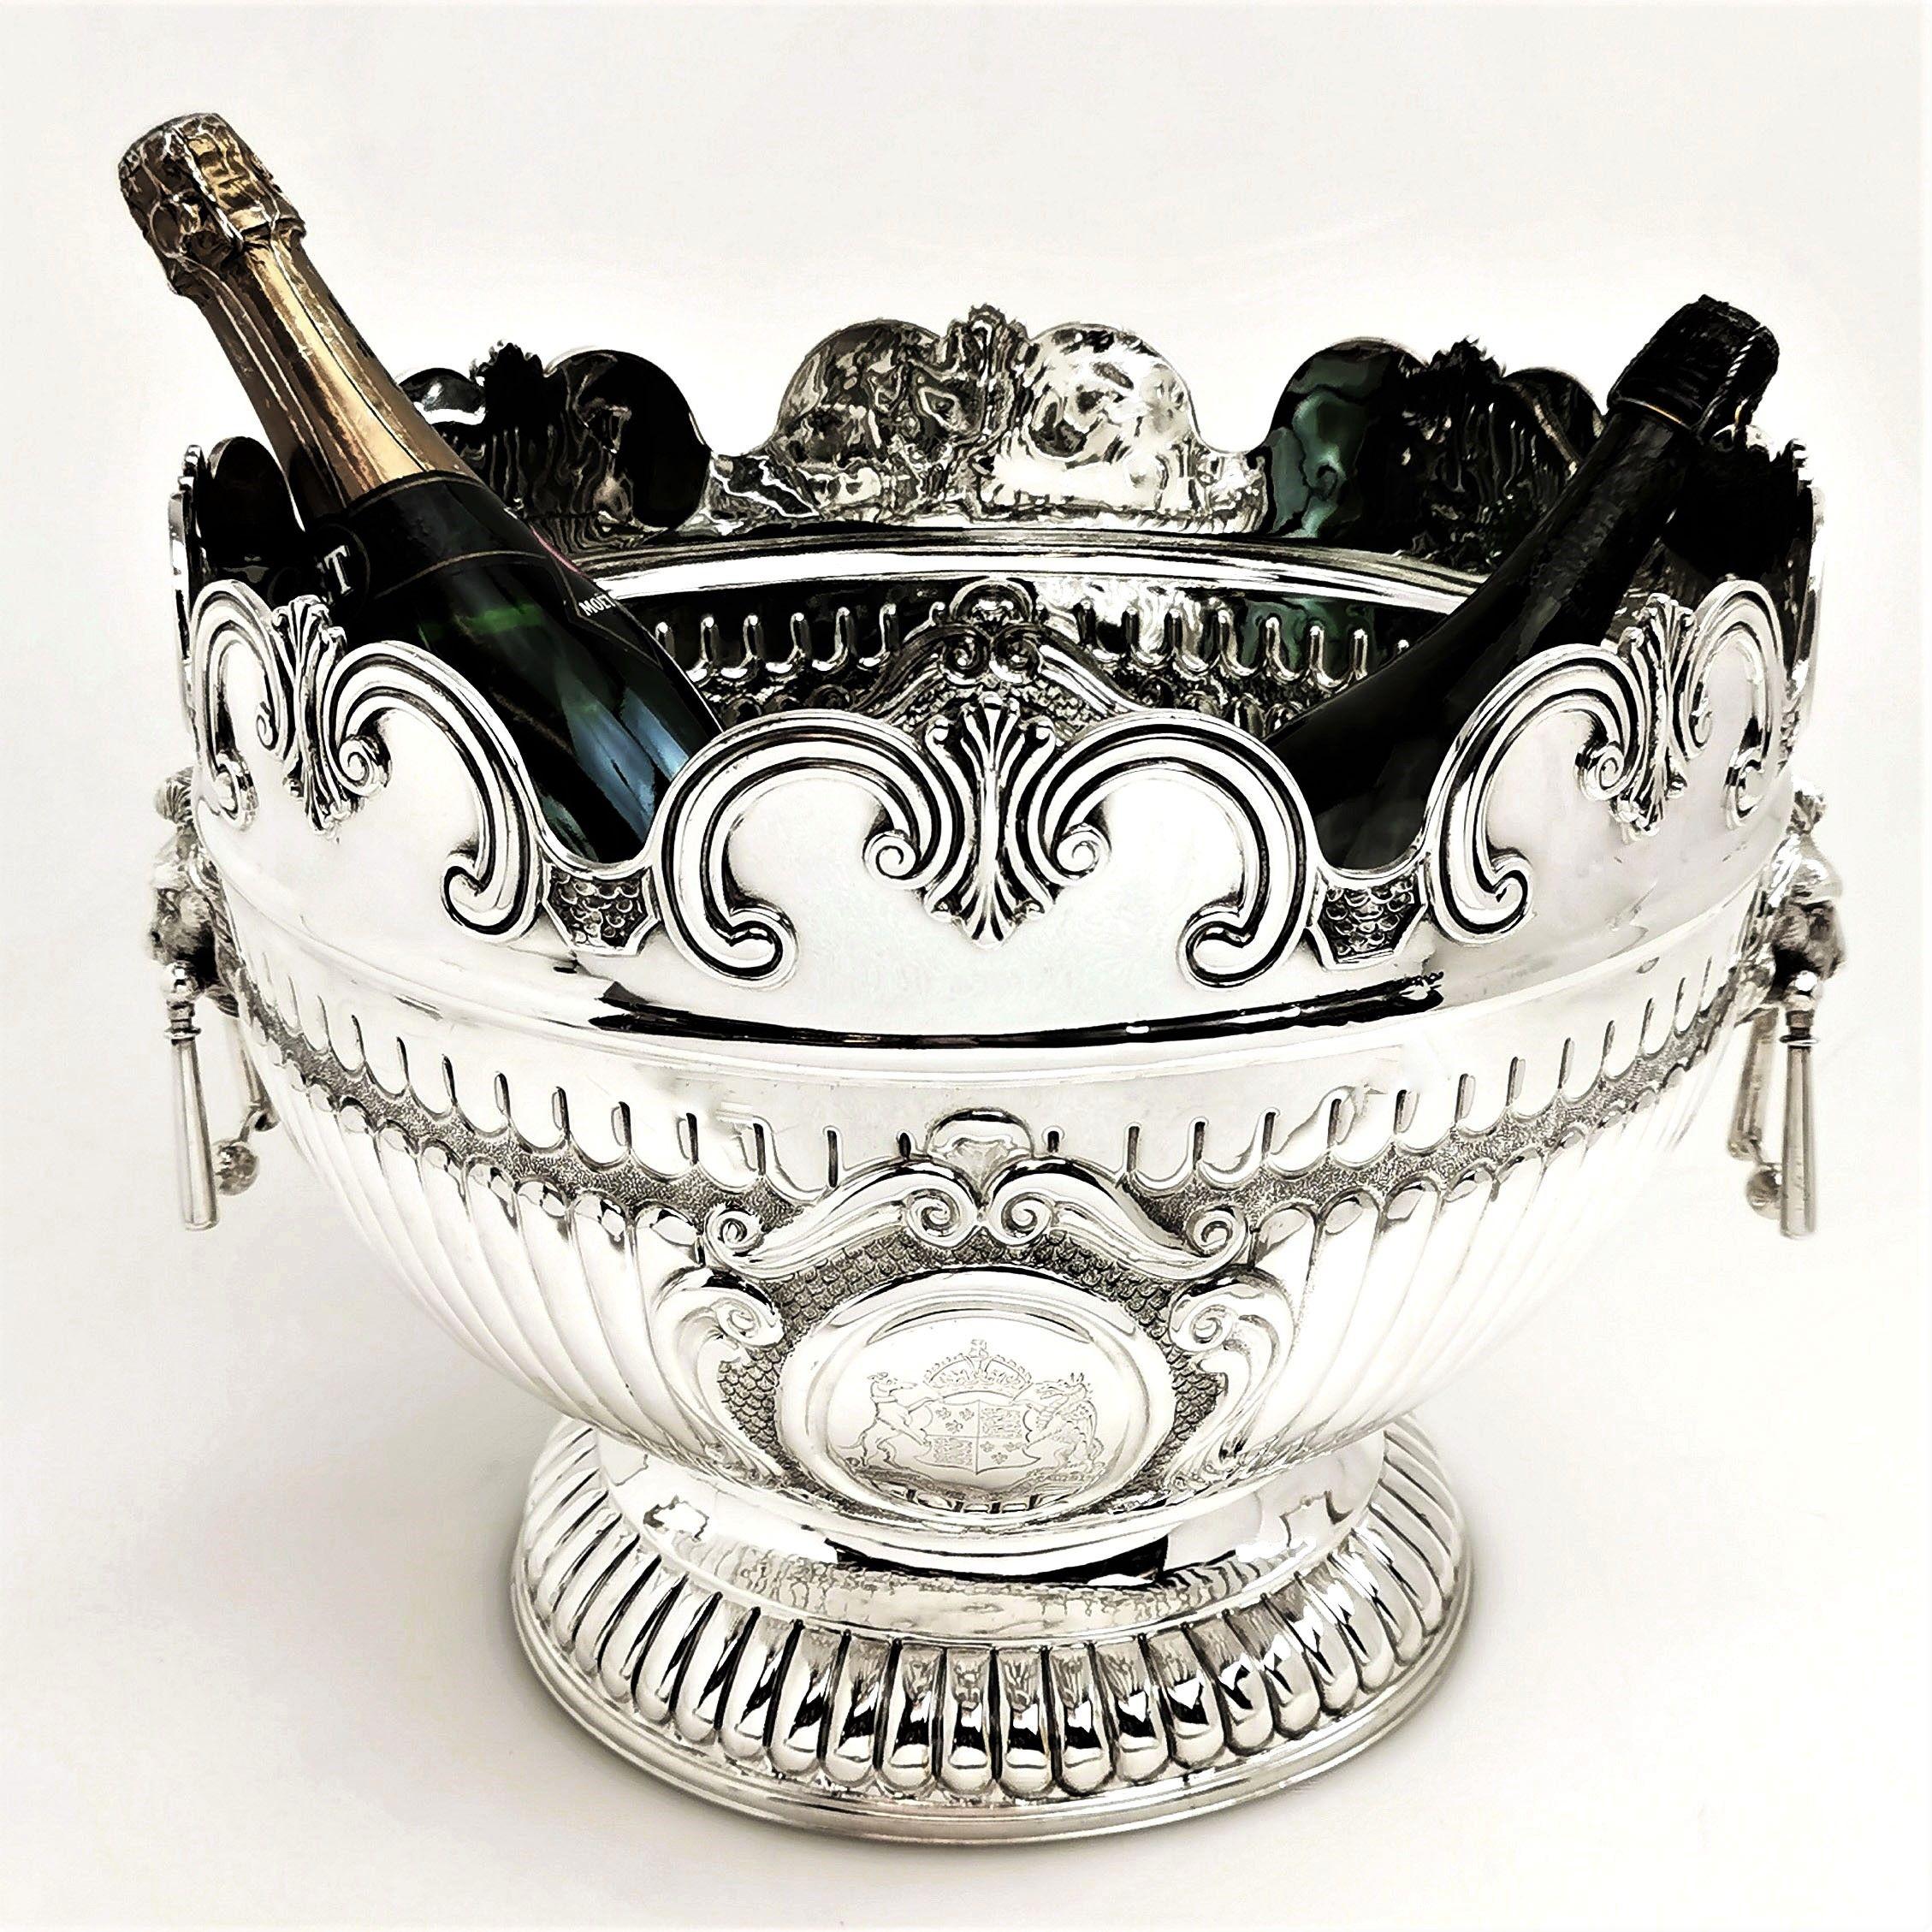 A magnificent Antique Victorian solid silver bowl. This Queen Anne Monteith style inspired punch bowl is of substantial size and is perfect for punch. It can also easily accommodate 4 bottles of champagne. The Bowl has a chased fluted design on the